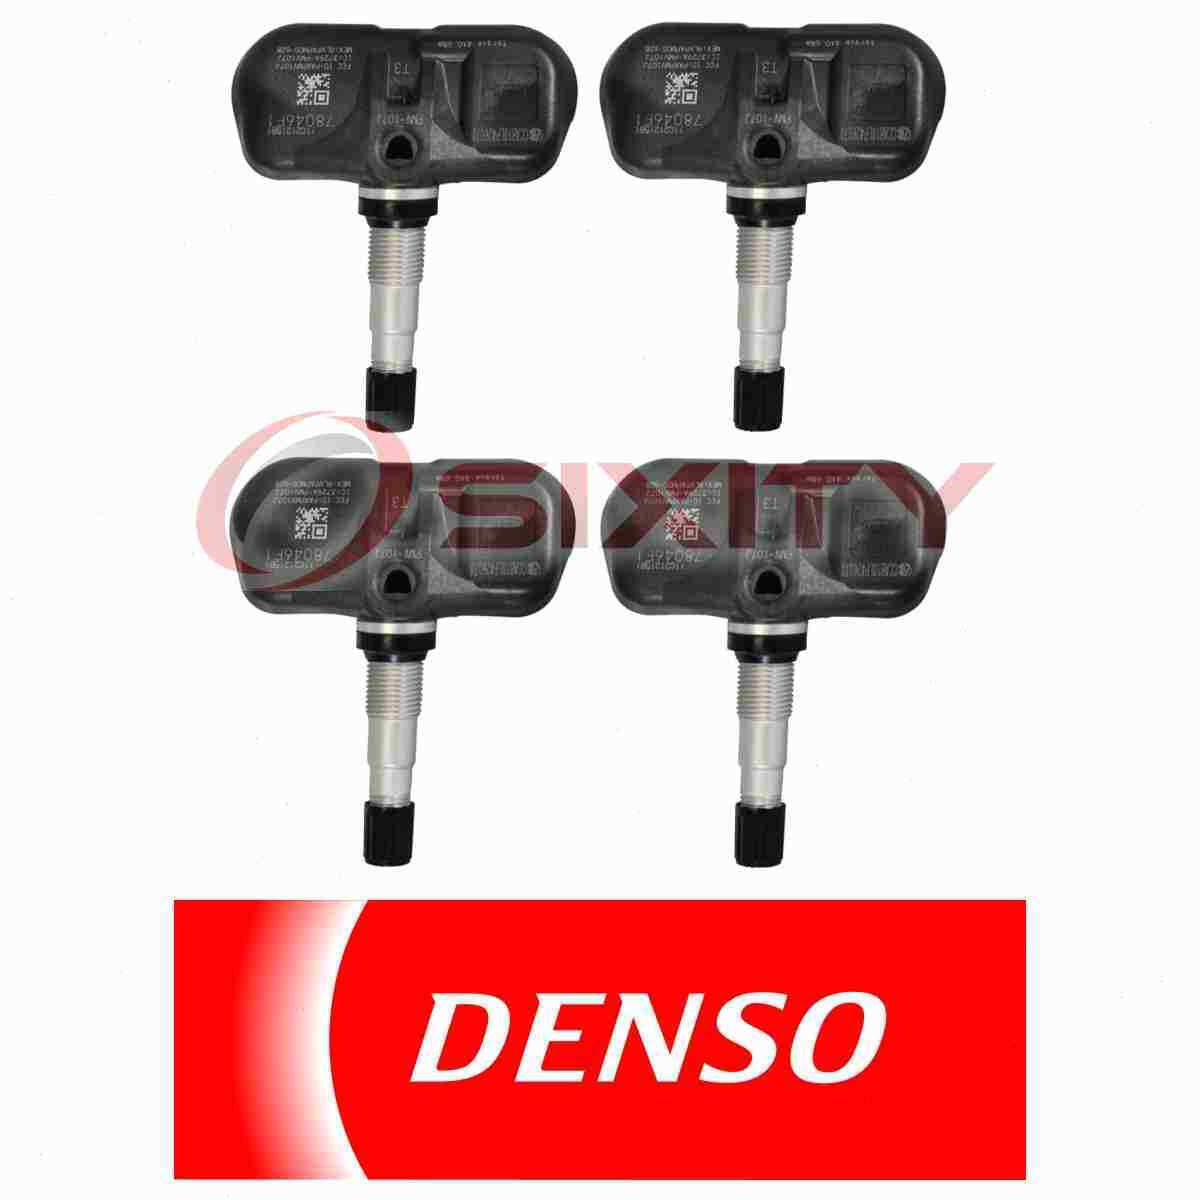 For Lexus IS250 DENSO 4 pc Tire Pressure Monitoring System Sensors 2006-2012 v5